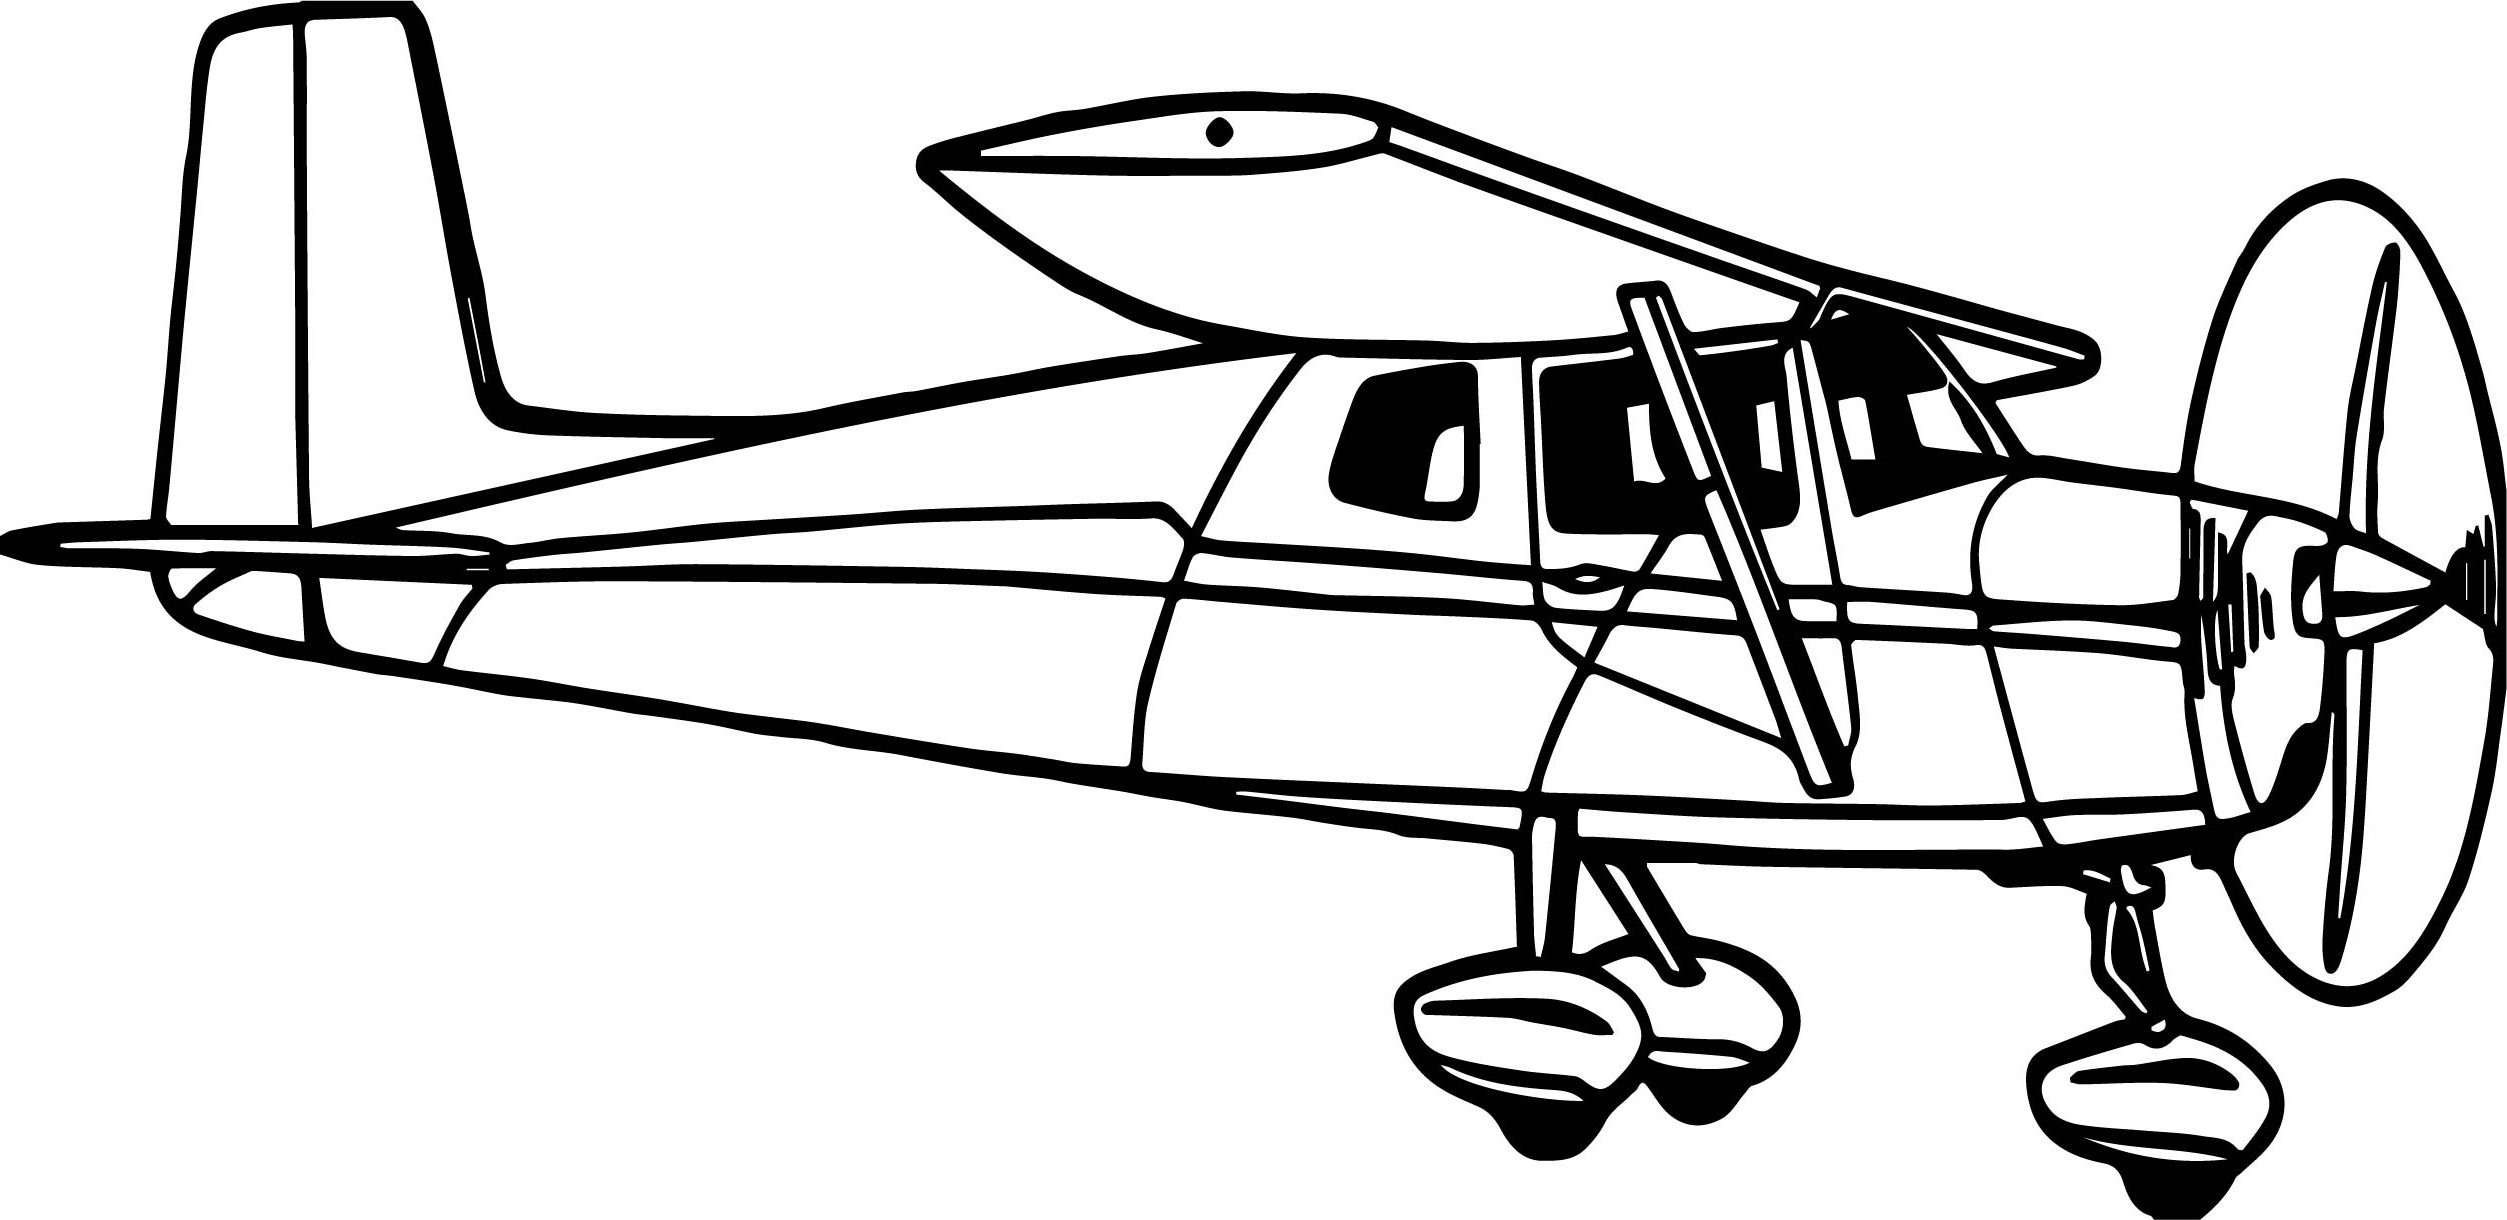 cessna airplane clipart 10 free Cliparts | Download images on ...